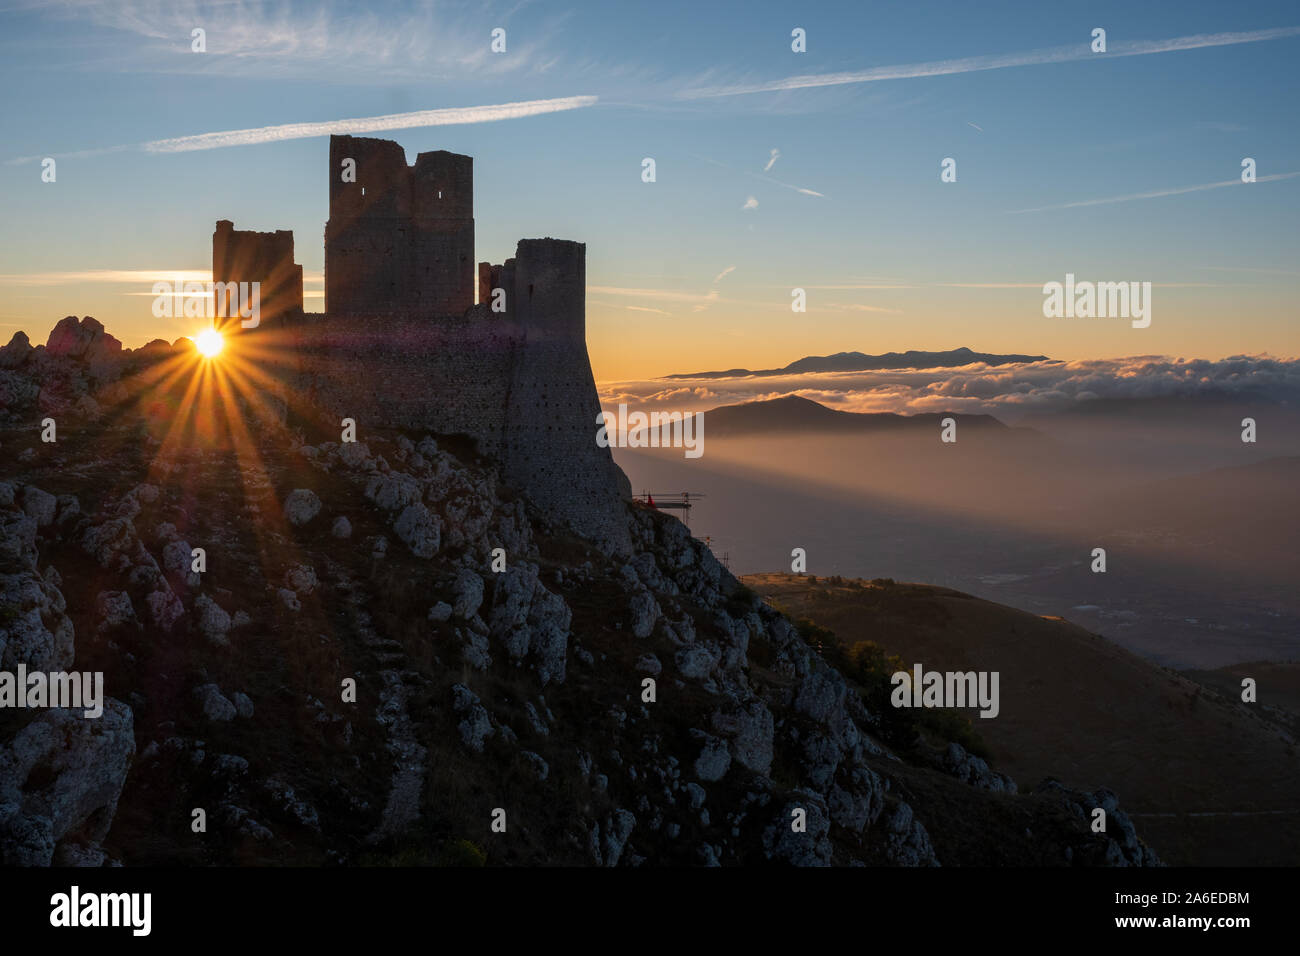 Ruins of medieval castle of Rocca Calascio at sunny morning, with foggy landscape in background and sunstar, Abruzzo, Italy Stock Photo